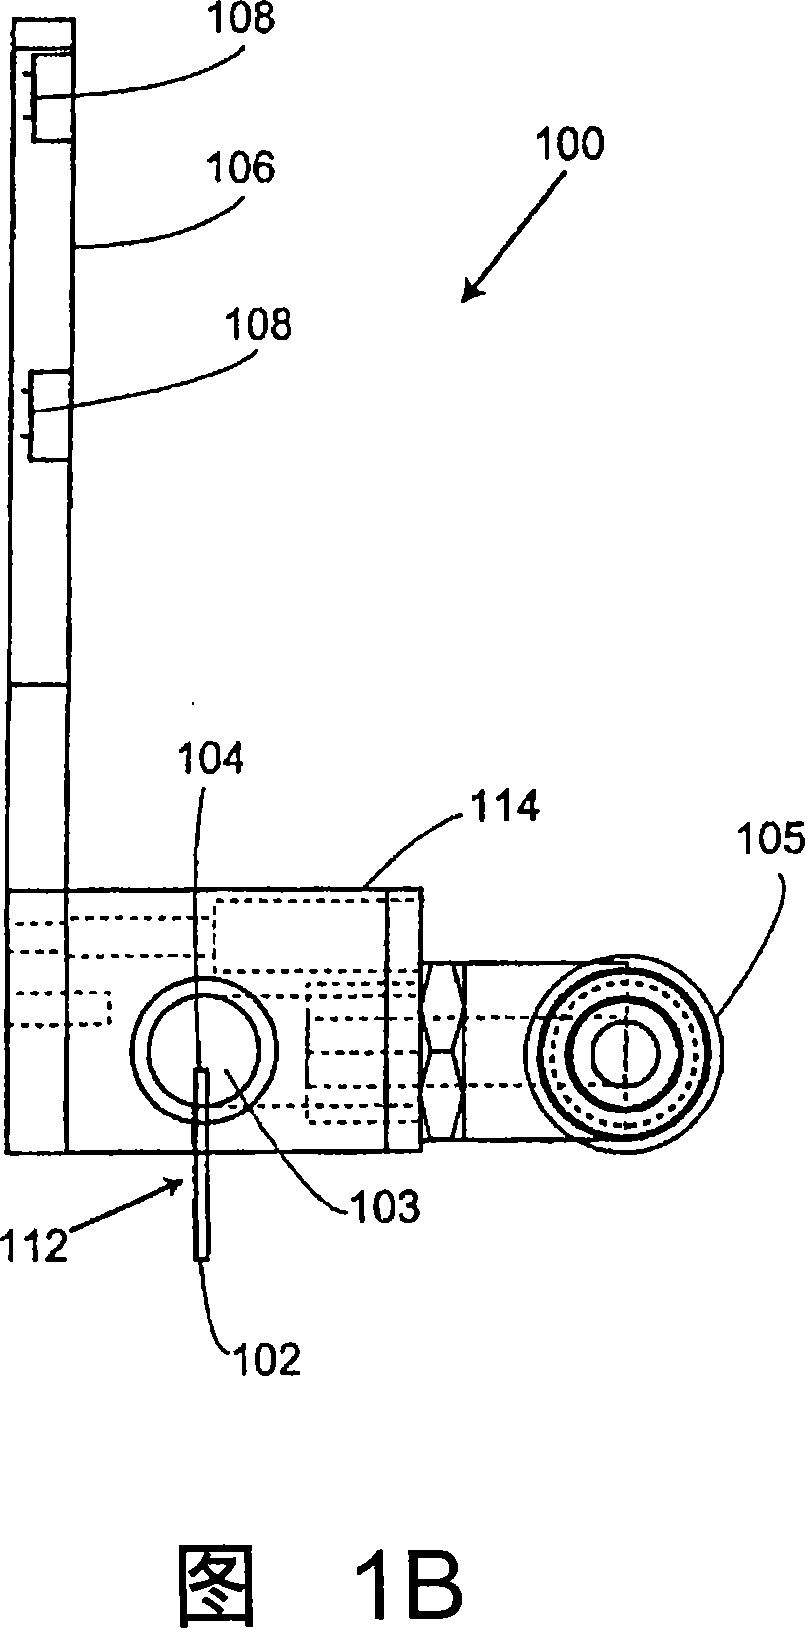 Multi-well container processing systems, system components, and related methods